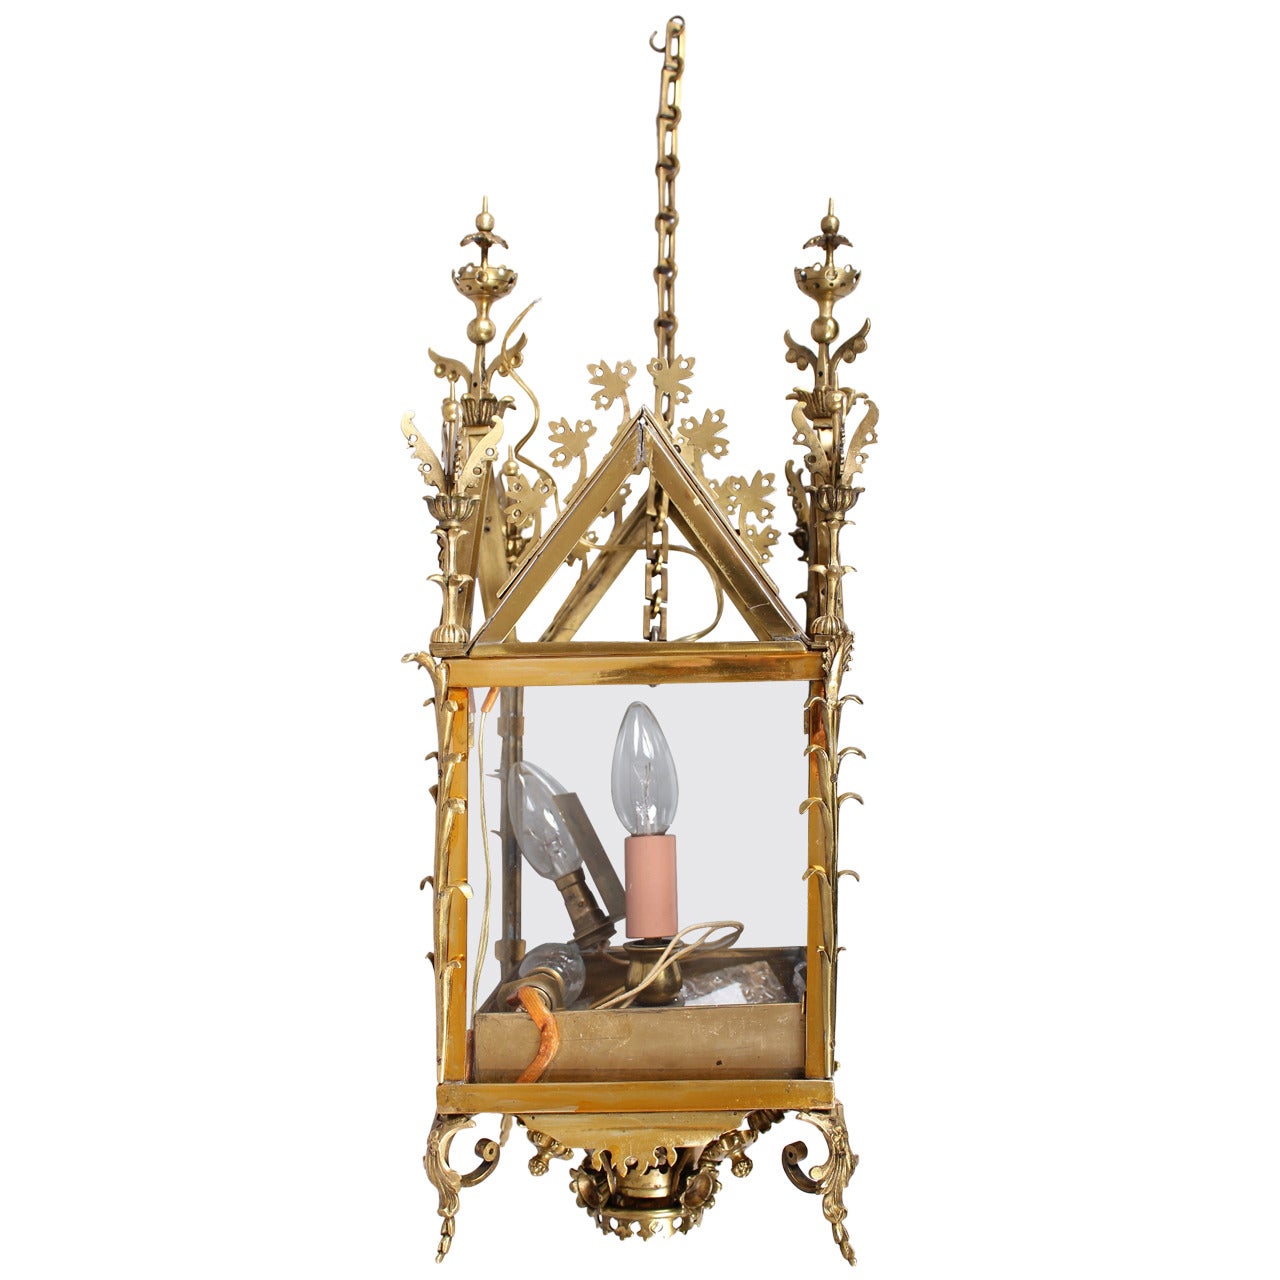 Decorative lacquered-brass hall-lantern in the Gothic style;  possibly Edwardian